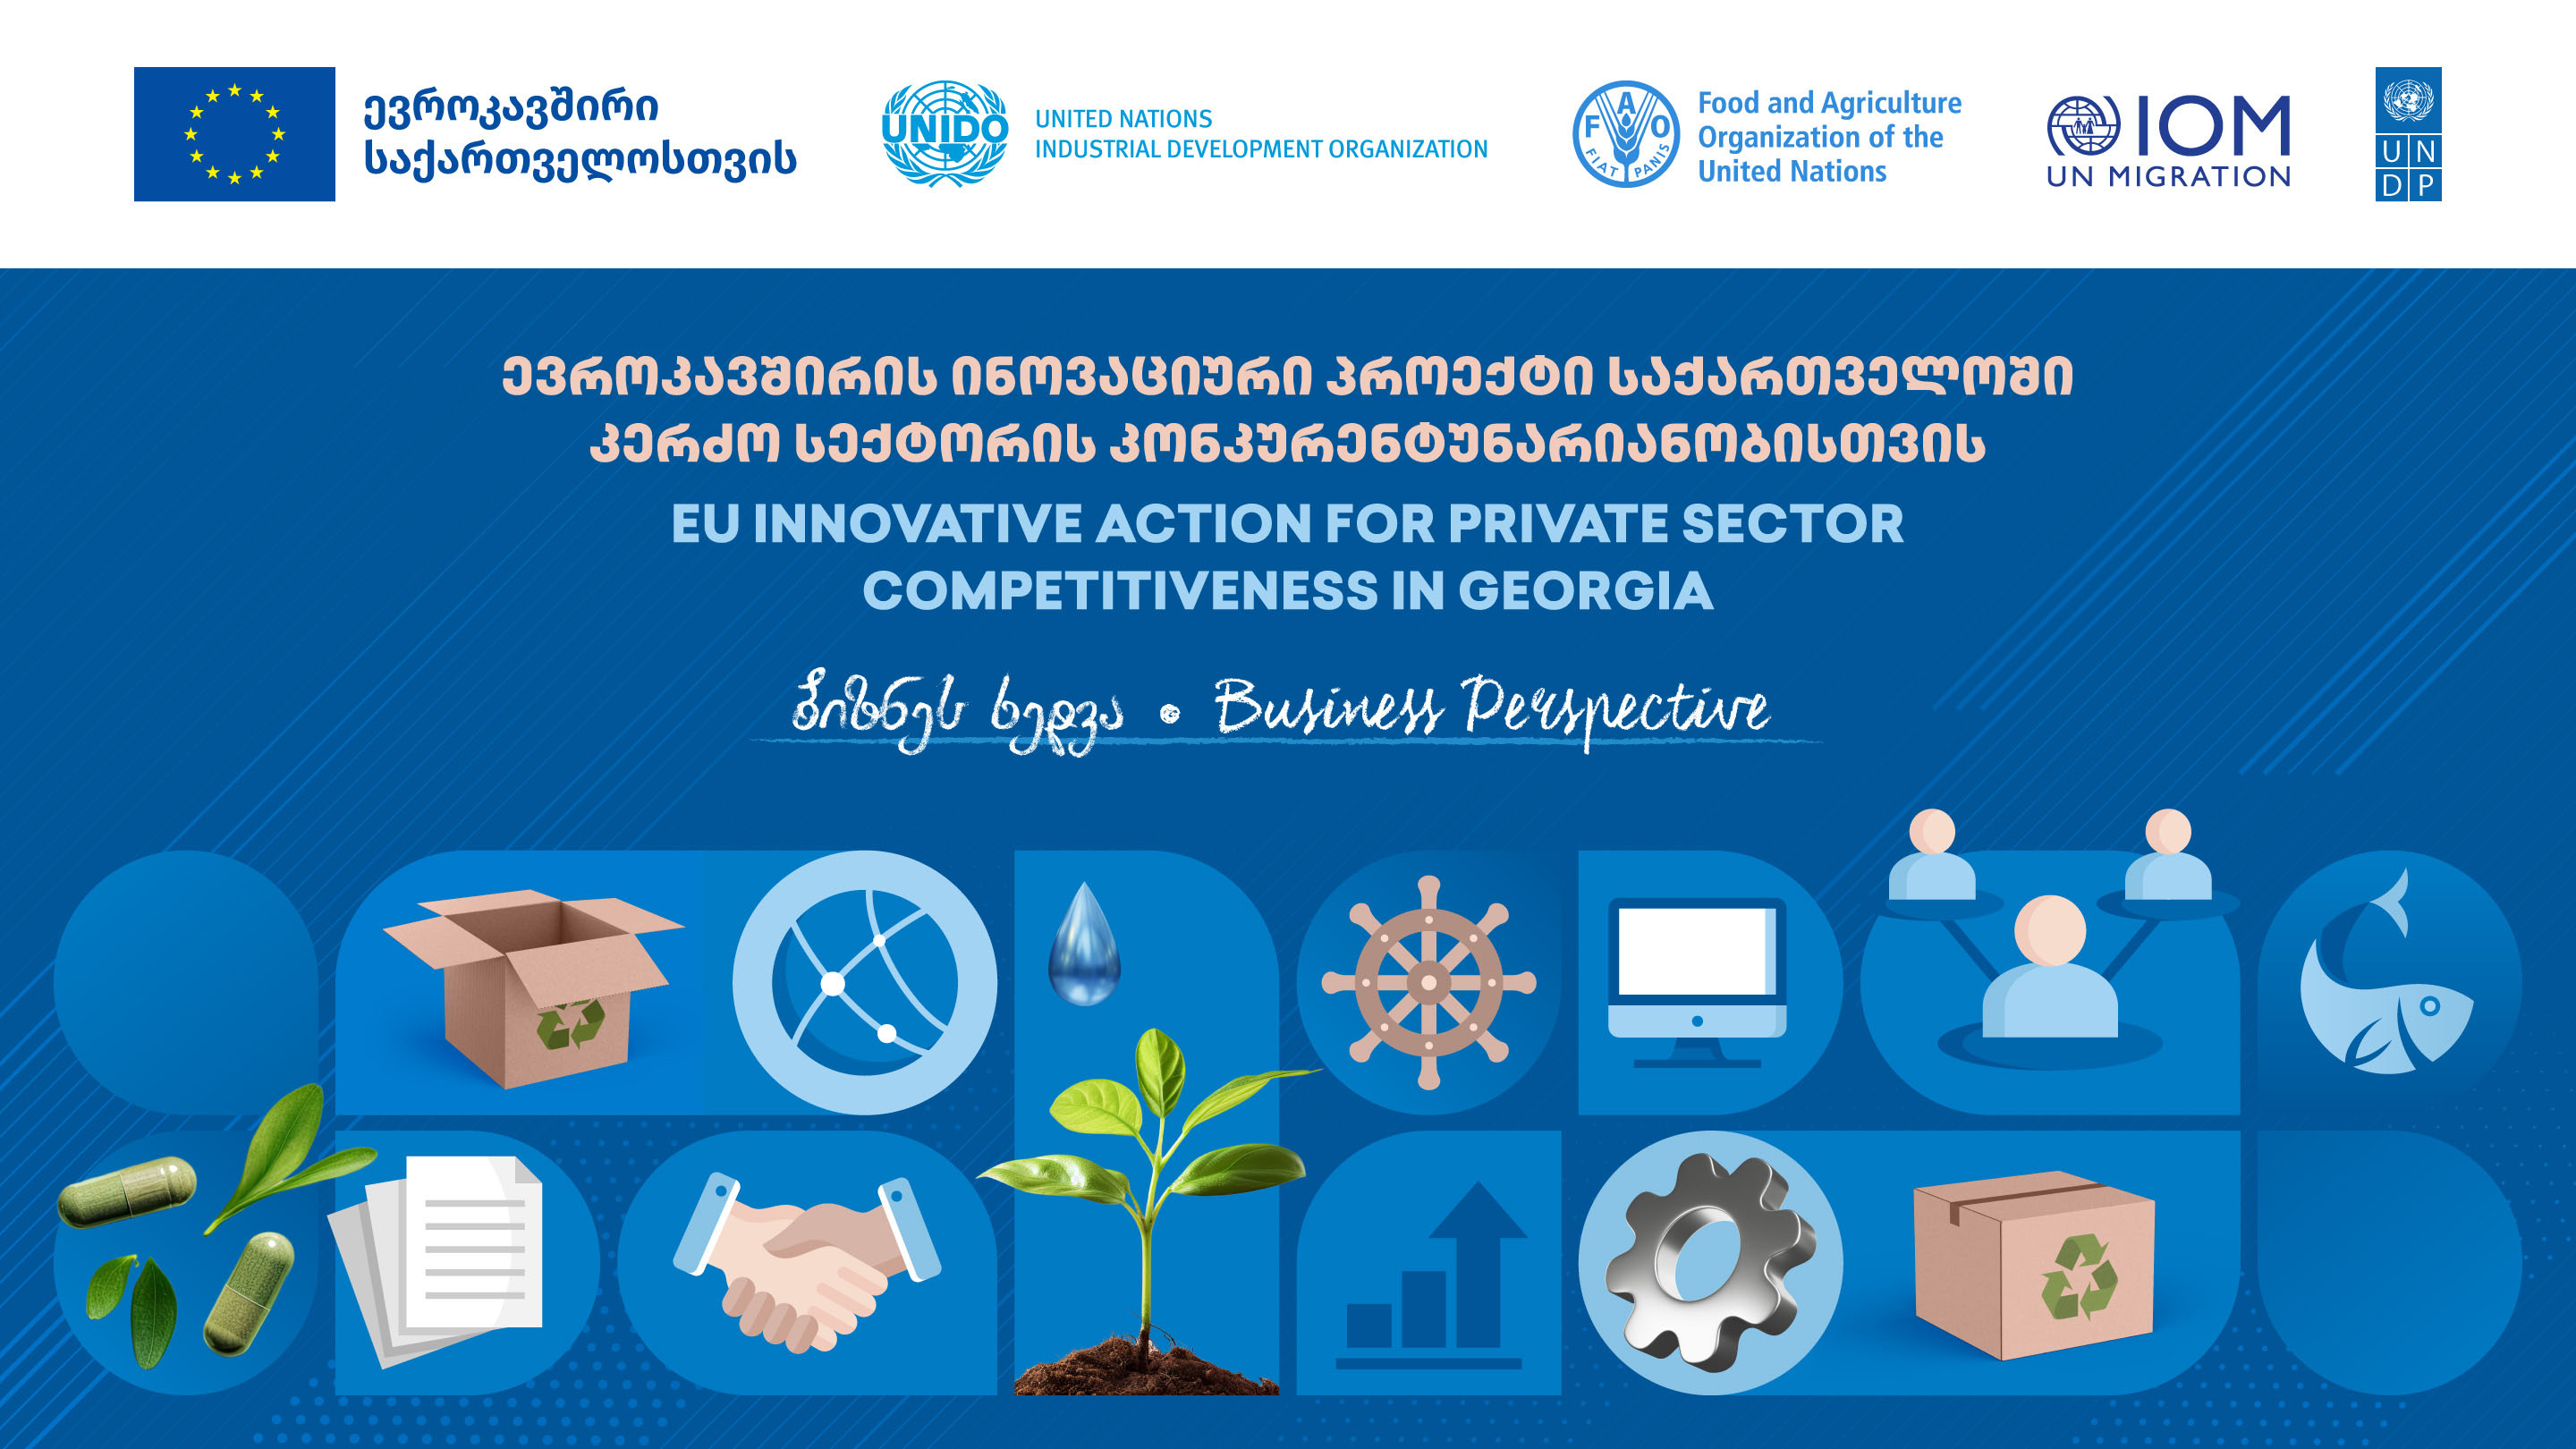 EU Innovative Action for Private Sector Competitiveness in Georgia